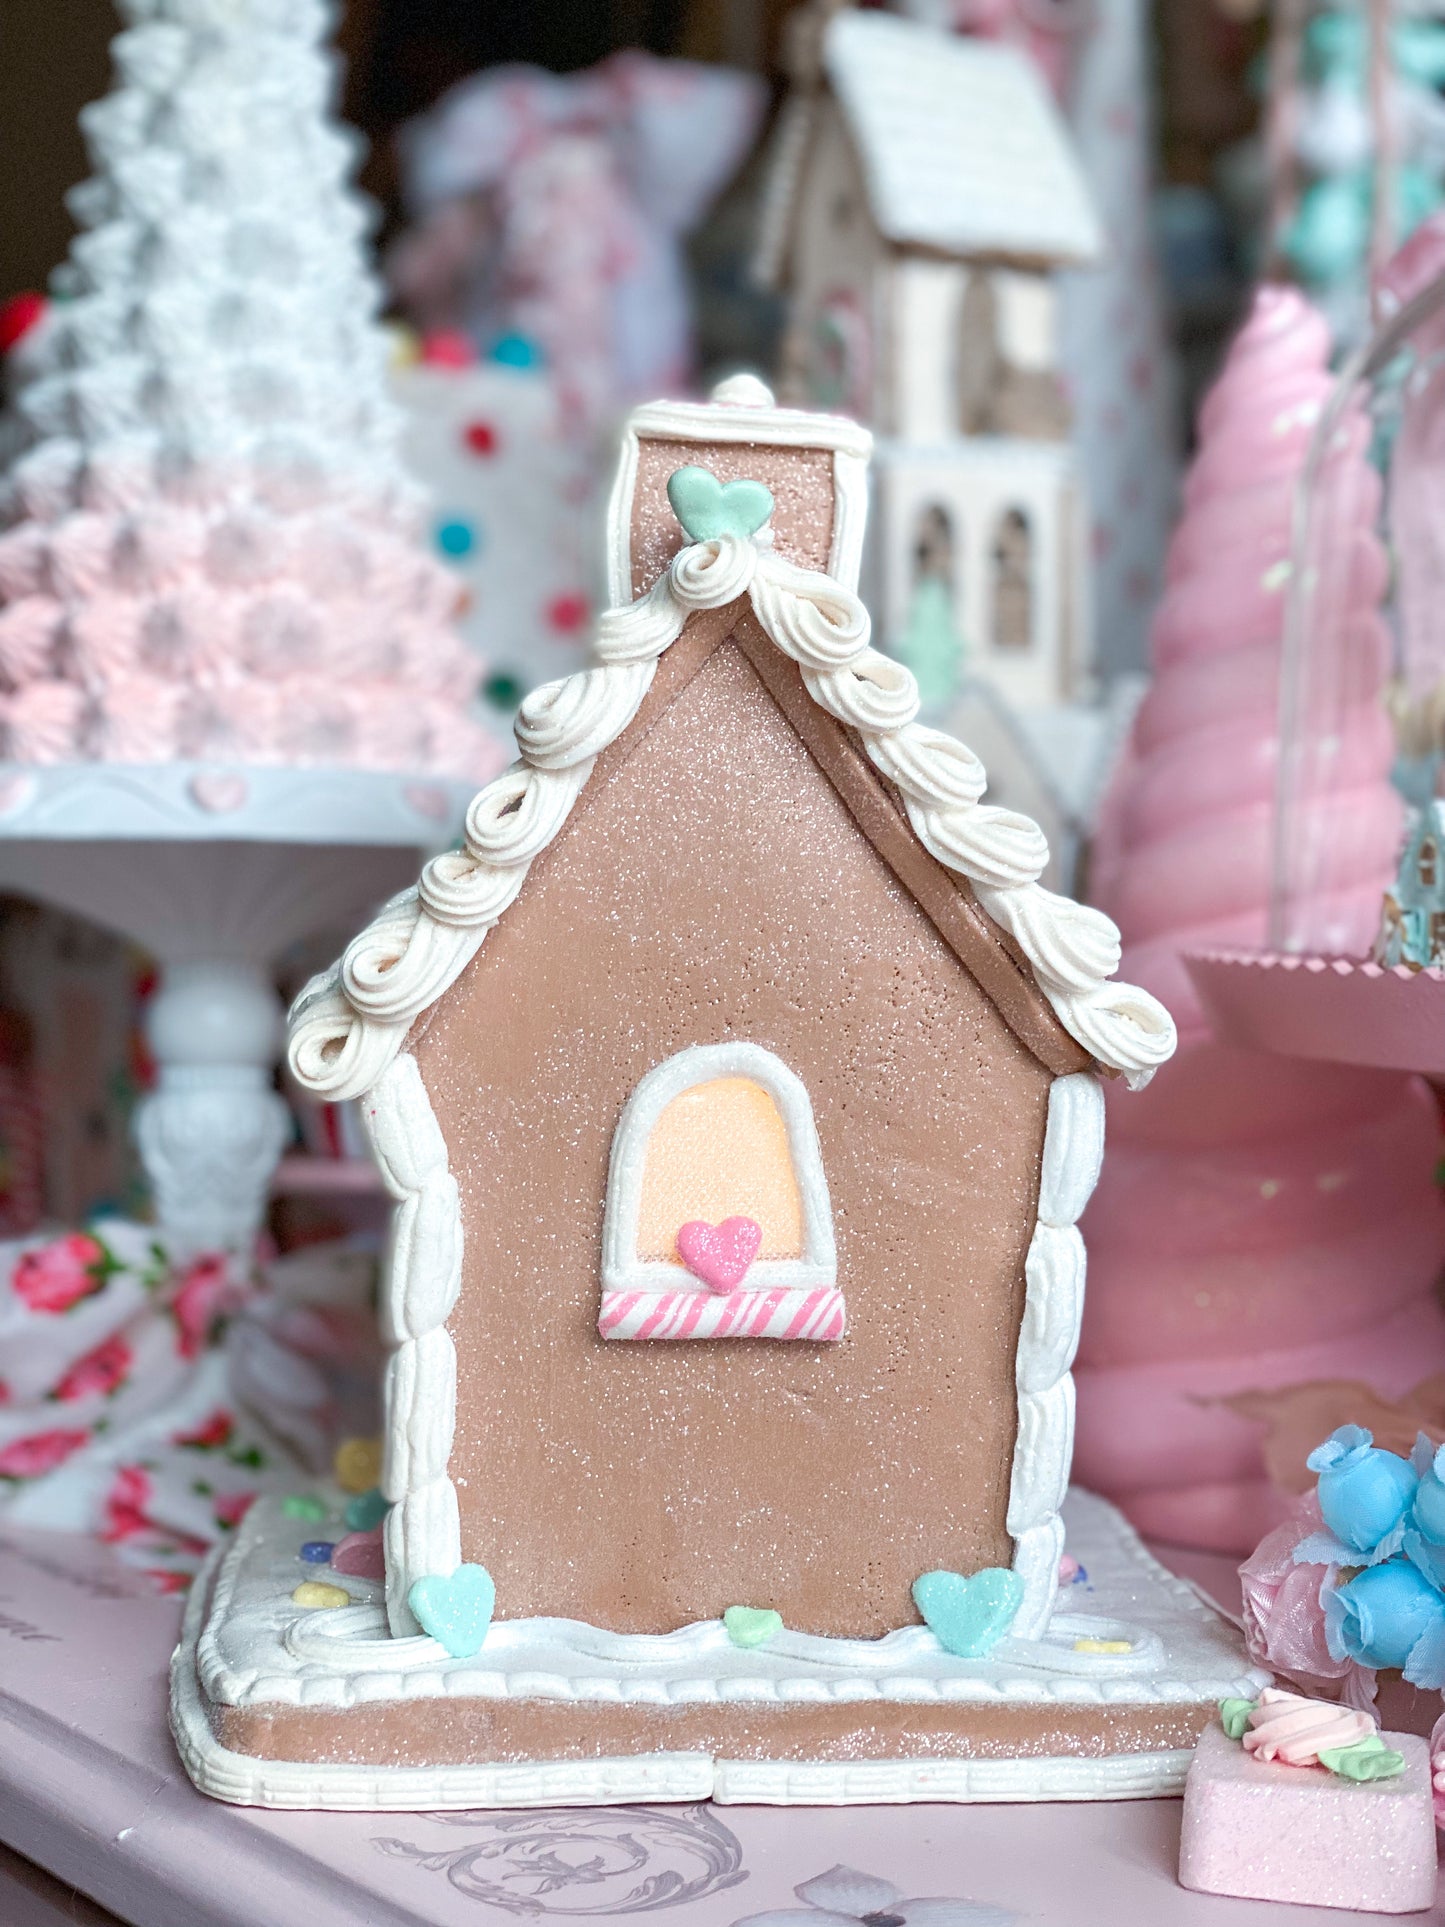 Claydough Valentine’s Day Gingerbread House